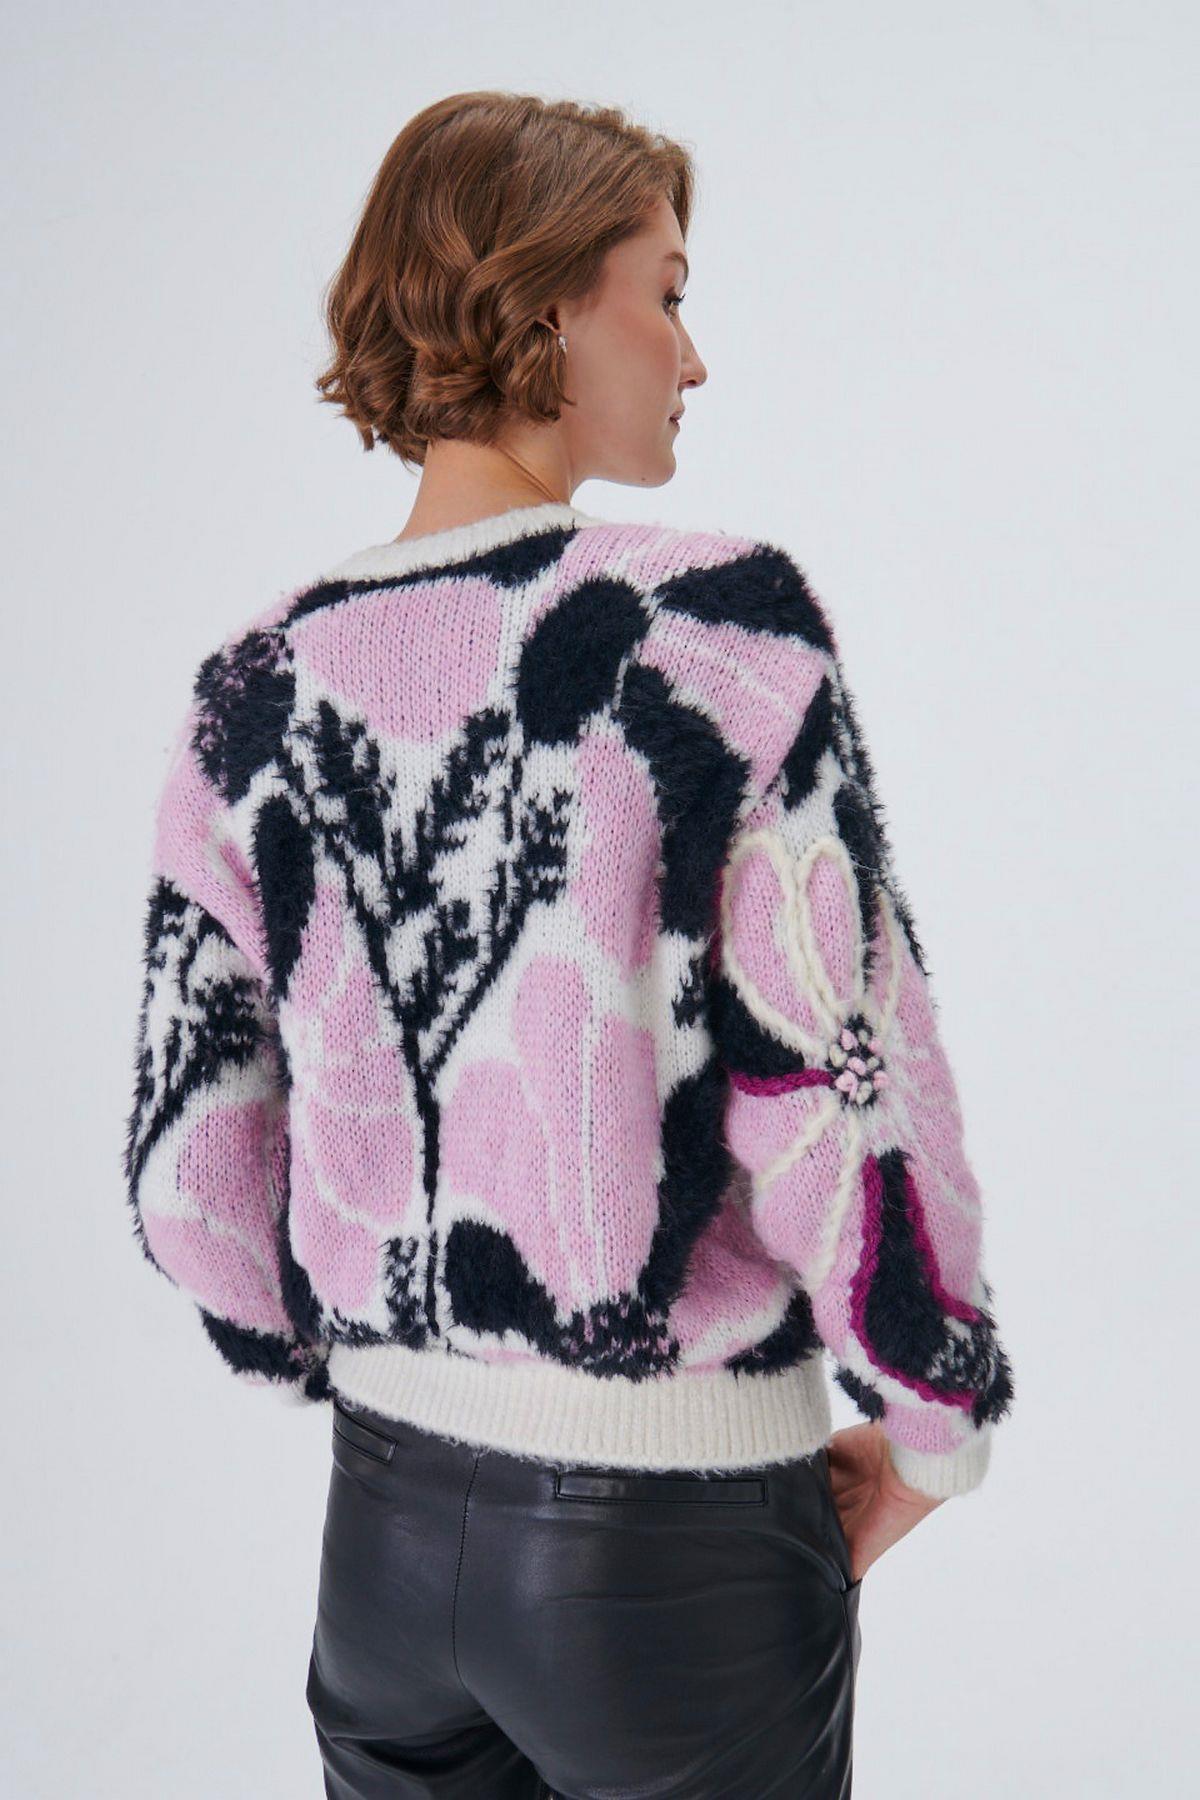 Handmade crafted Floral Patterned Wool Multi Knitted Sweater